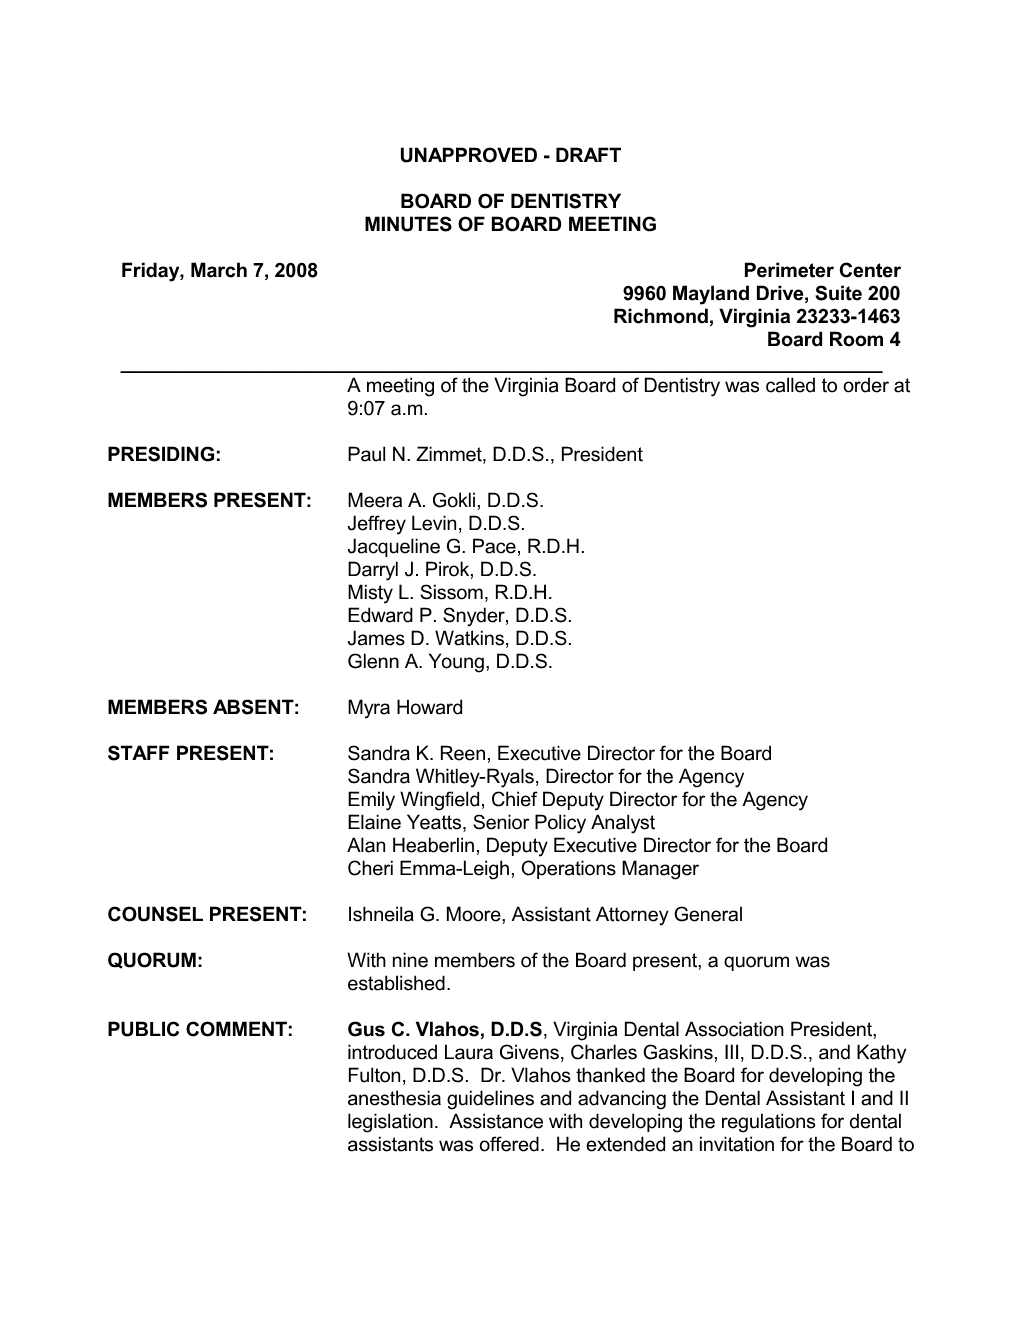 Board of Dentistry Minutes 03-07-2008